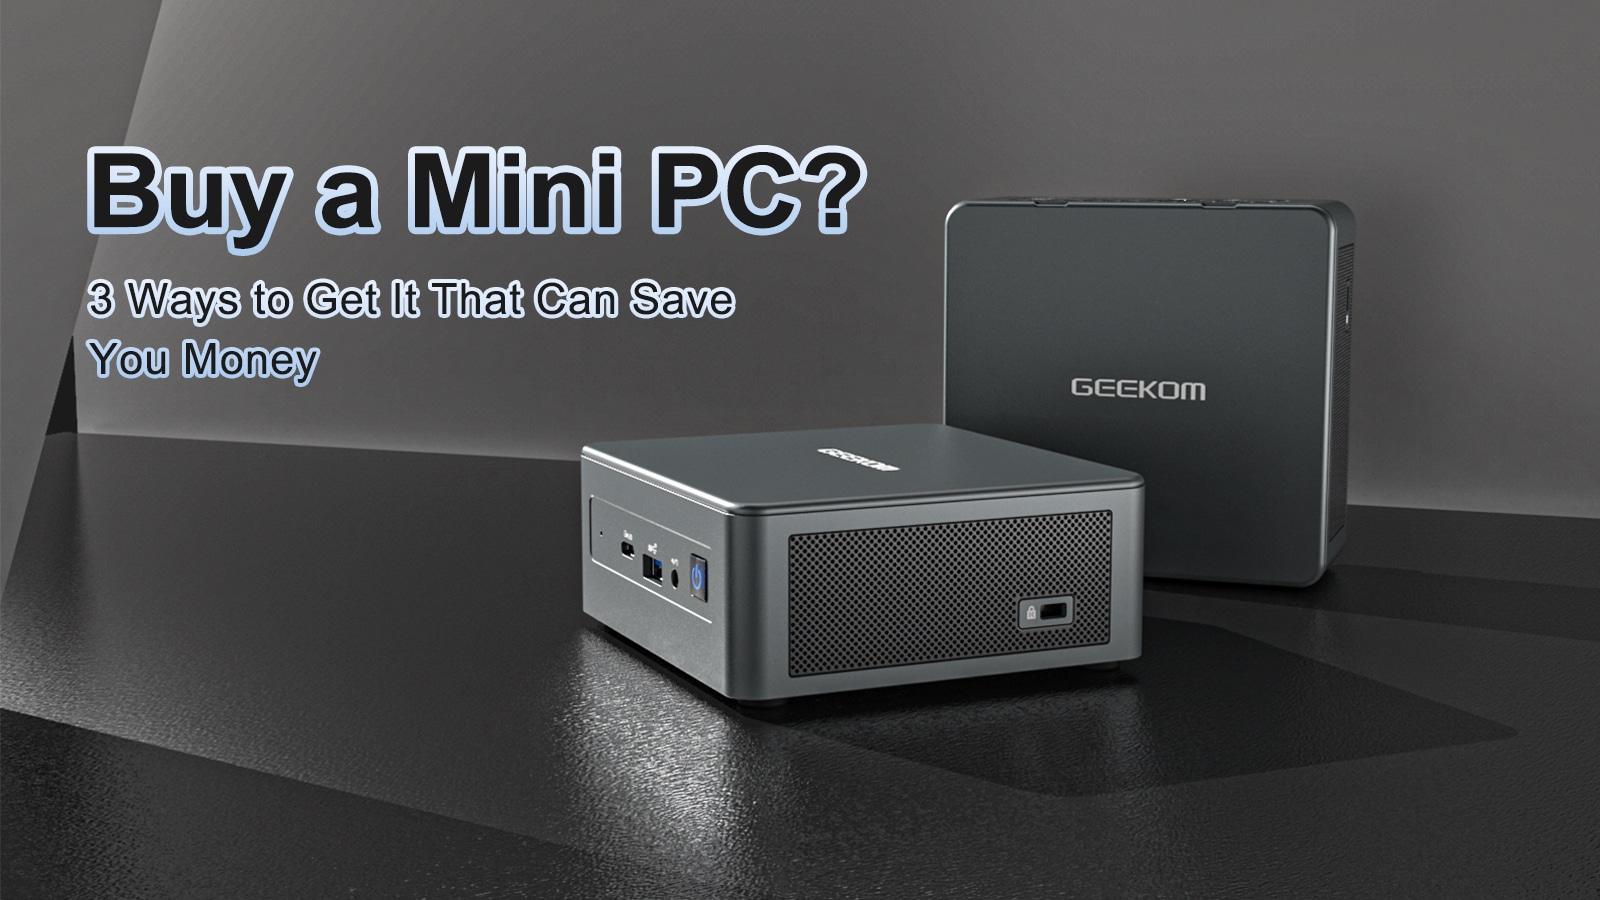 Buy a Mini 3 Ways to Get It Can Save Money - GEEKOM